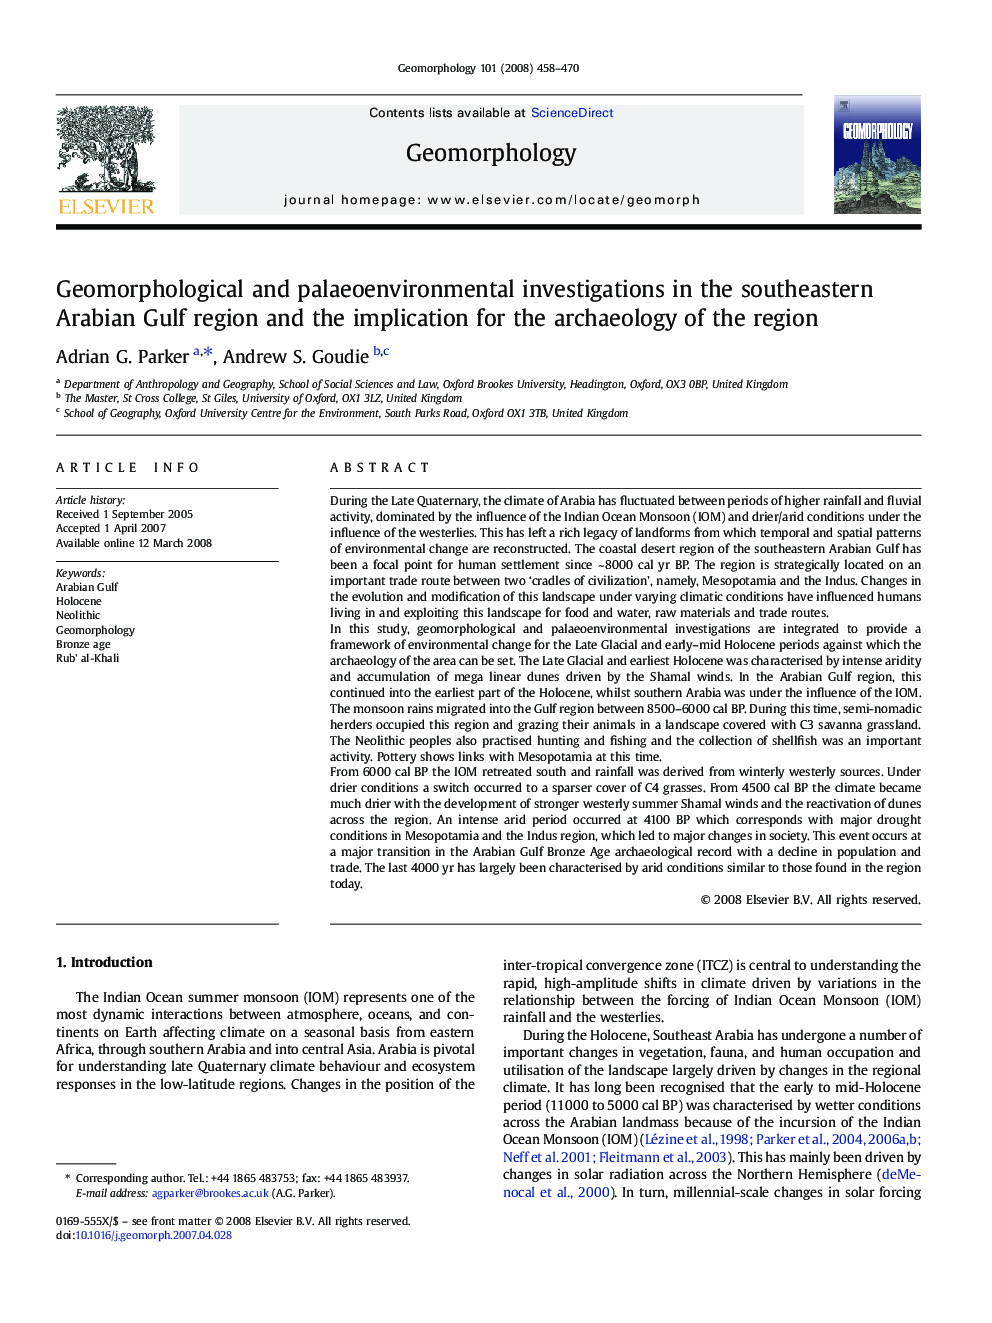 Geomorphological and palaeoenvironmental investigations in the southeastern Arabian Gulf region and the implication for the archaeology of the region